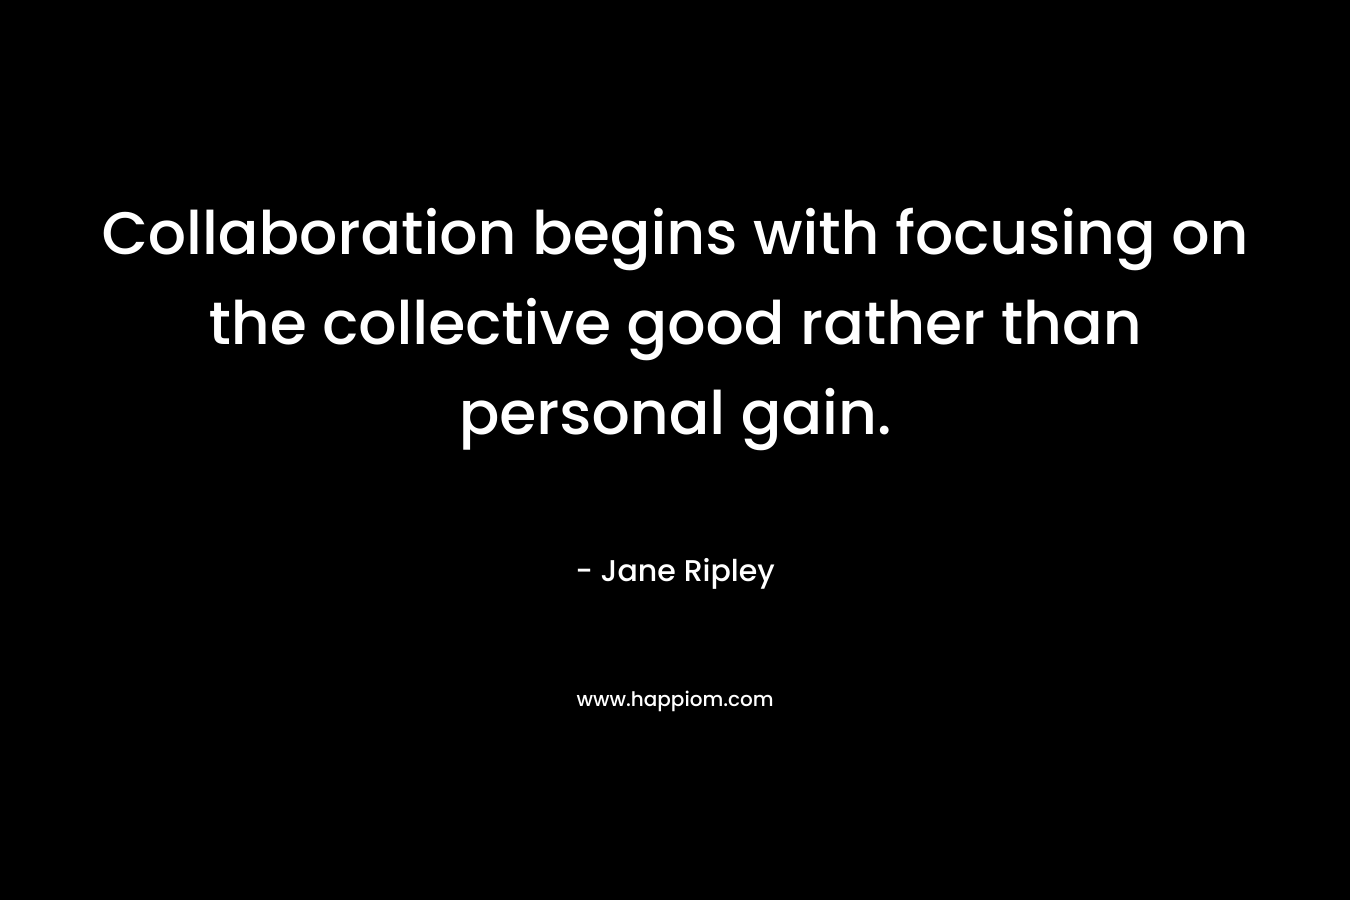 Collaboration begins with focusing on the collective good rather than personal gain.